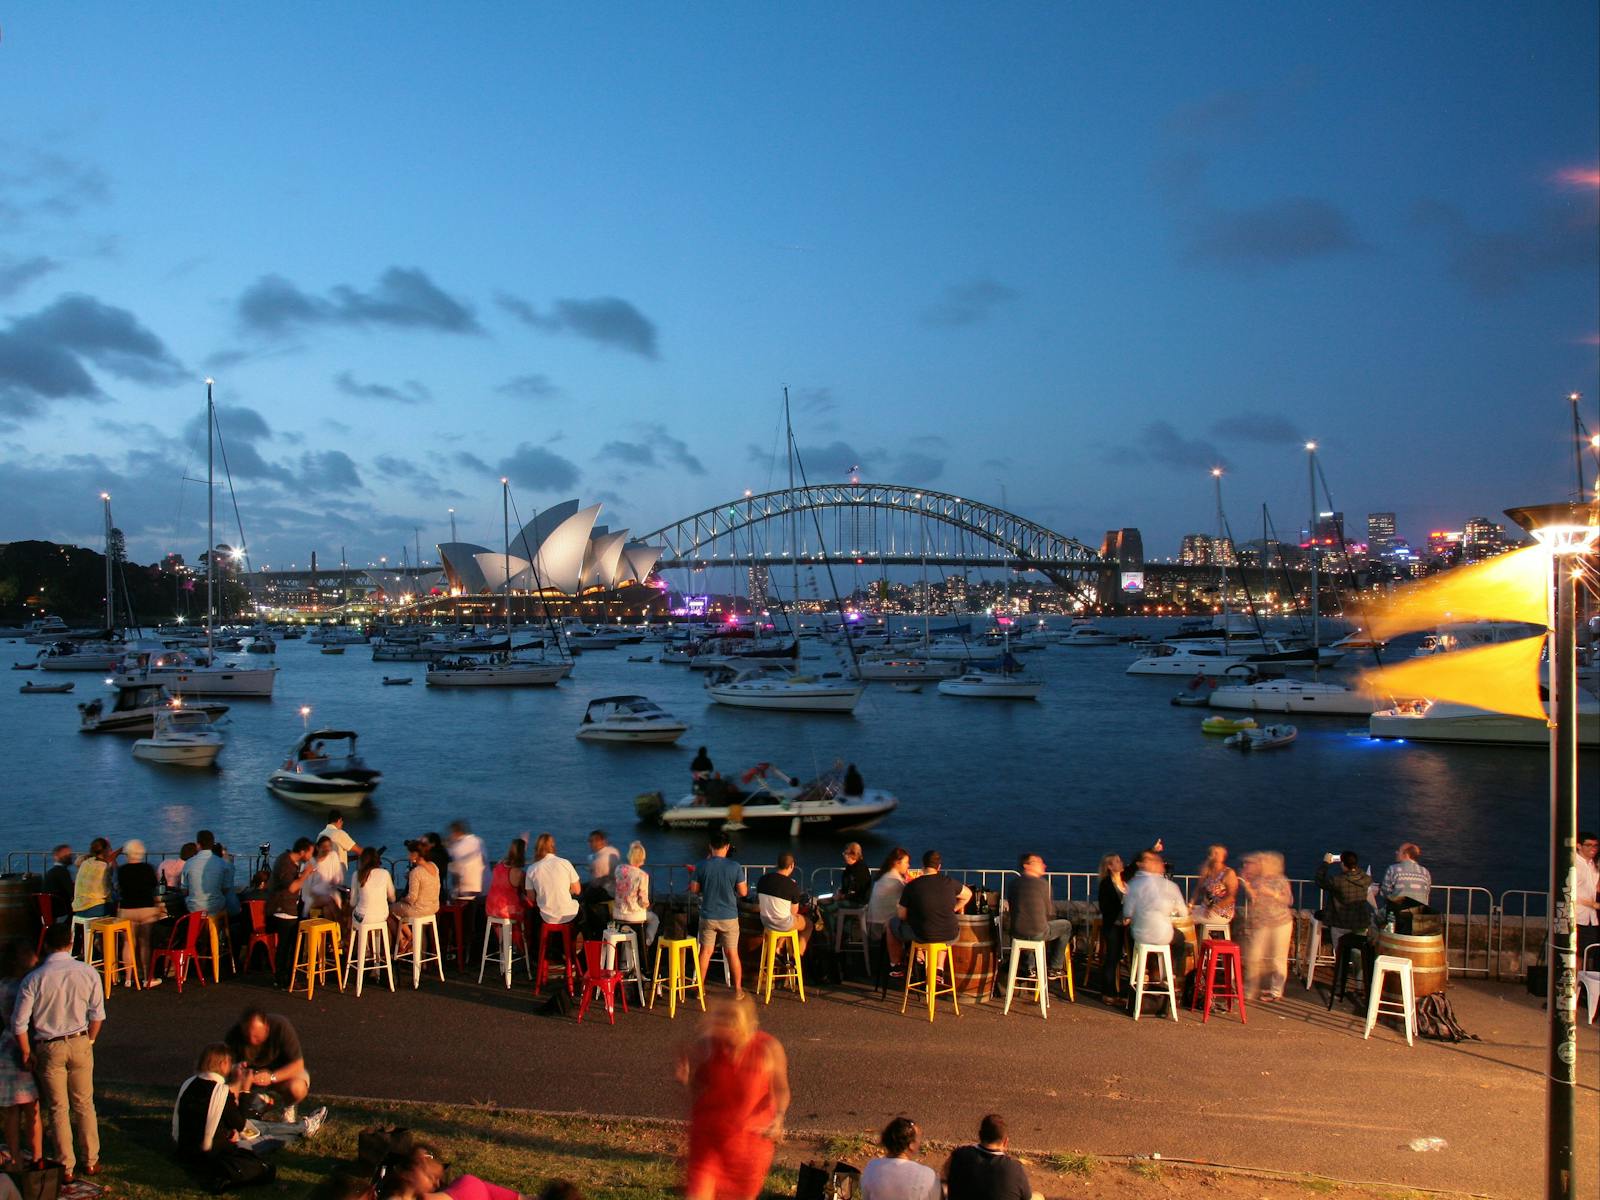 Image for The Point - New Year's Eve at the Royal Botanic Garden Sydney